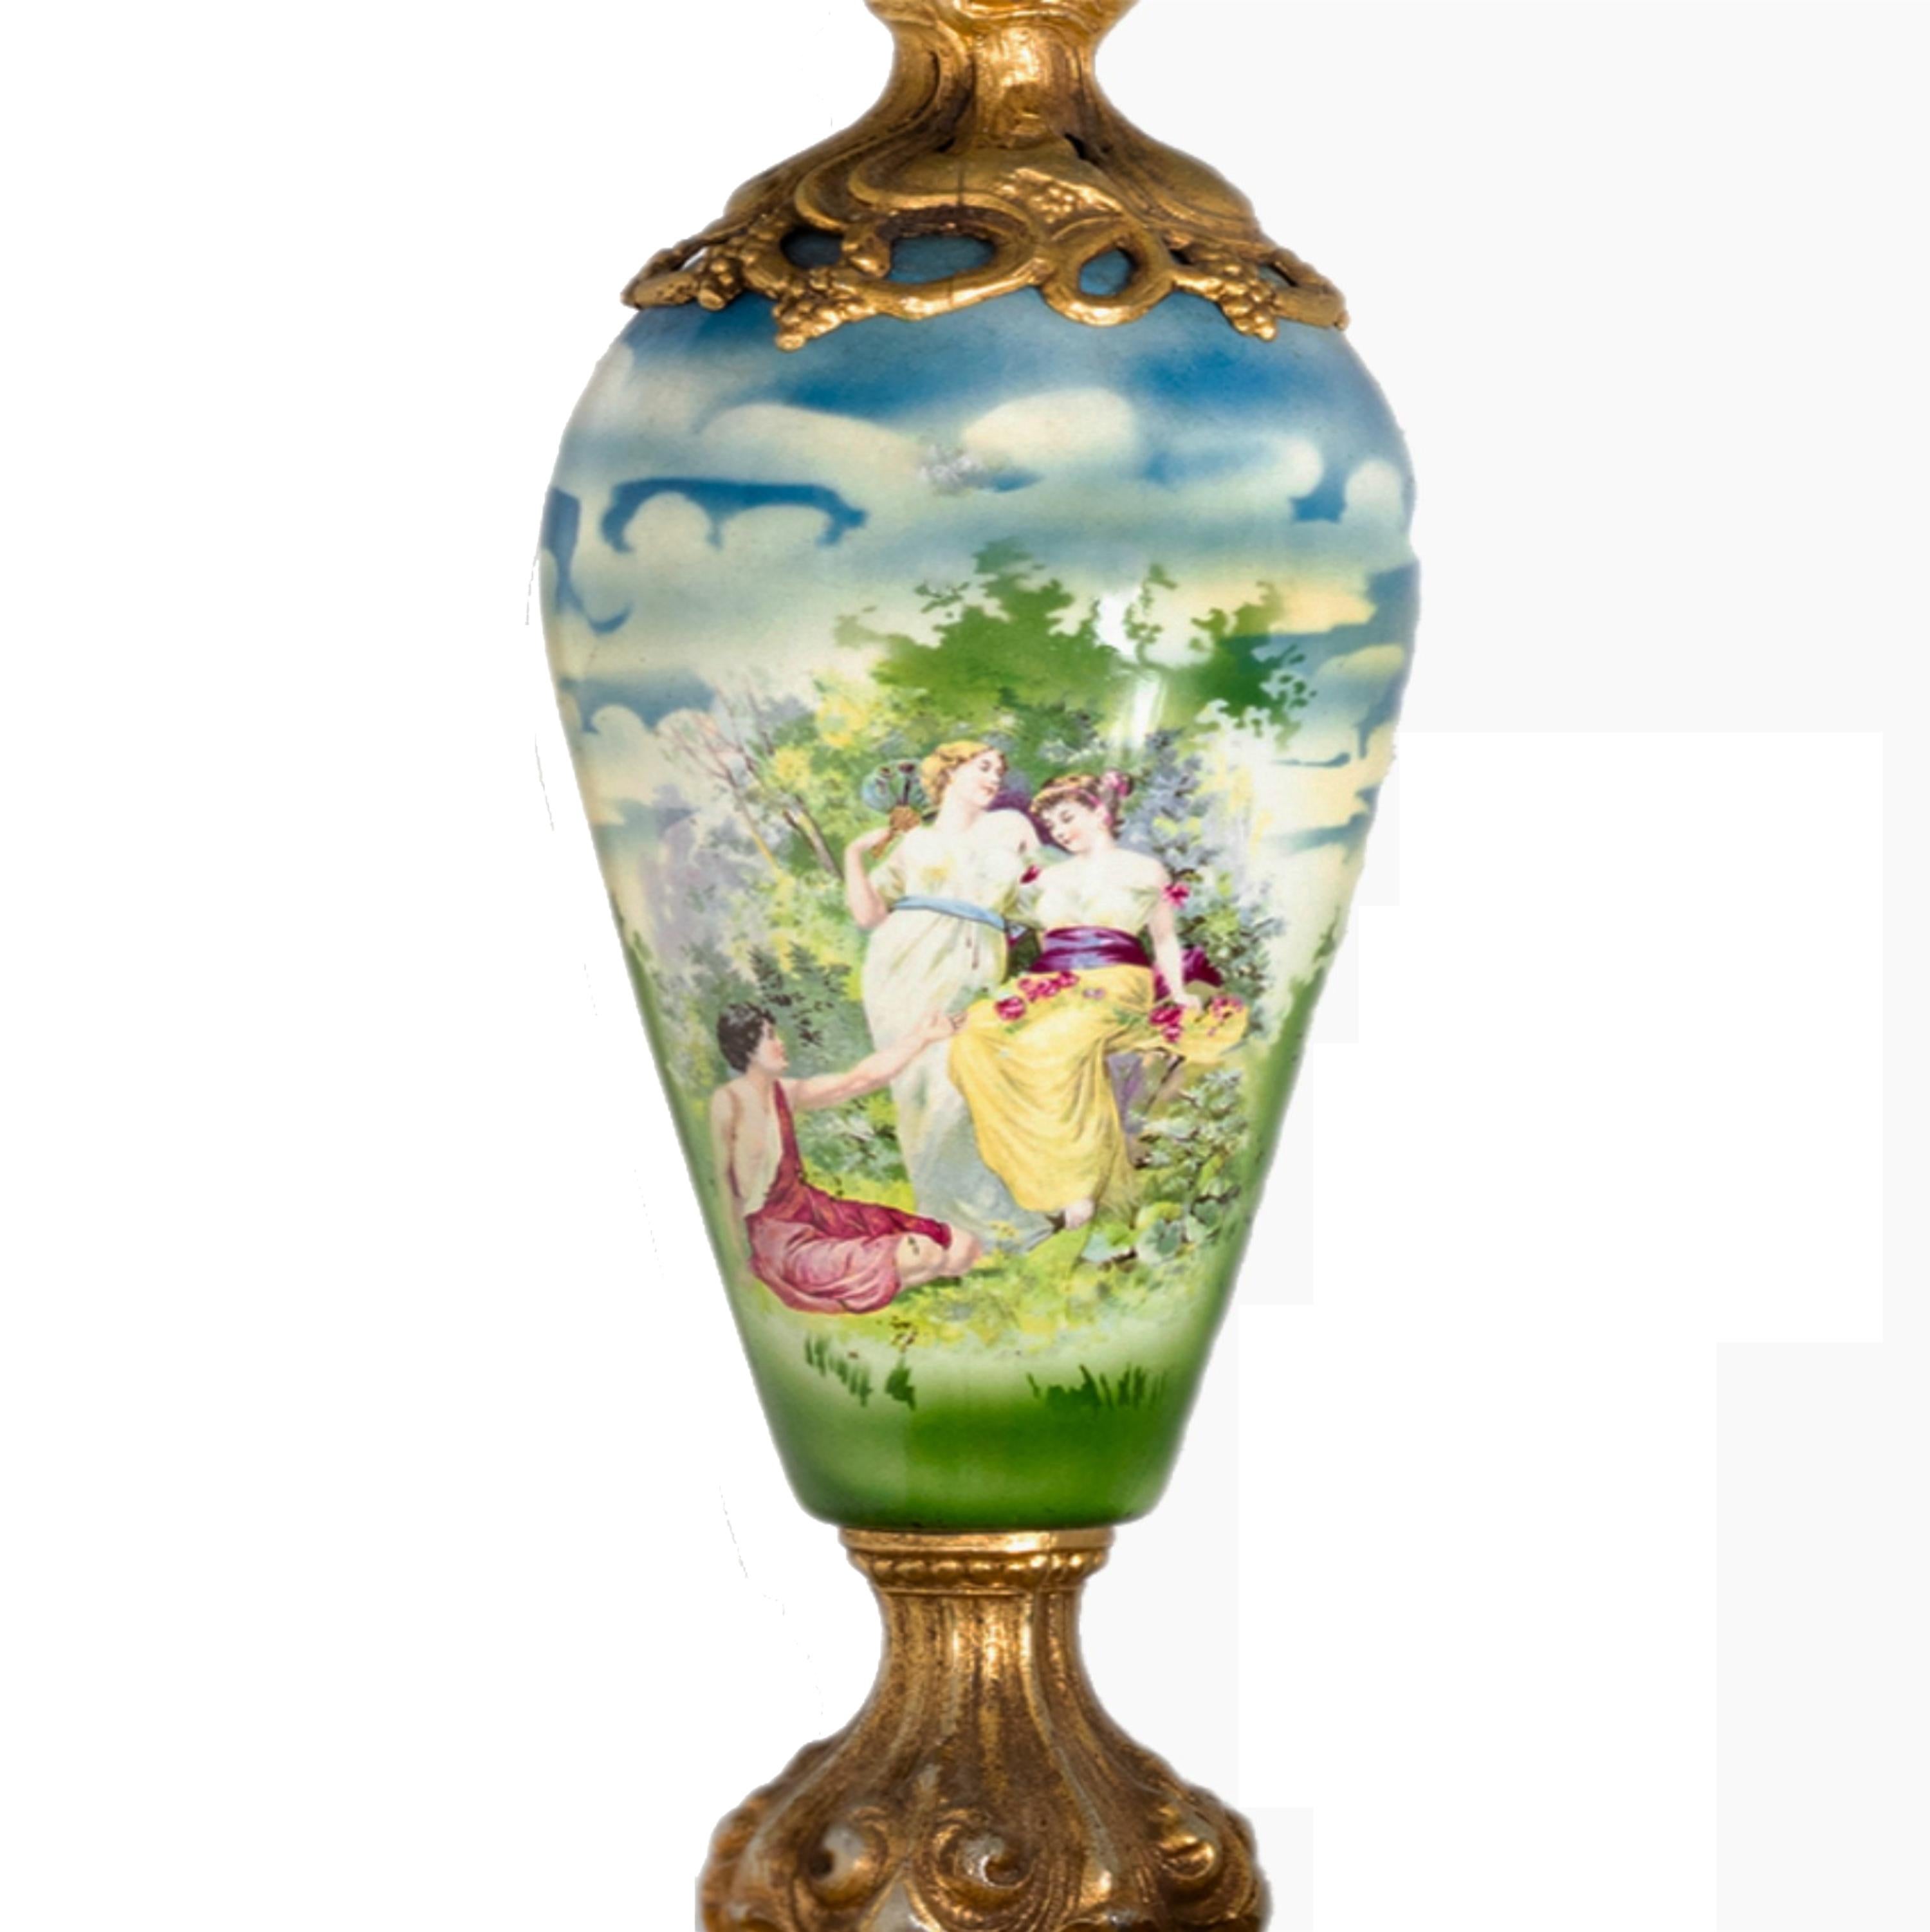 A Napoleon III Sevres styled table lamp with painted porcelain with gallant nymphs in the garden, gilded bronze and letterhead in the spirit of the Baroque Revivalist style of the 1900s

height with lampshade: 68 cm
height without lampshade: 48 cm